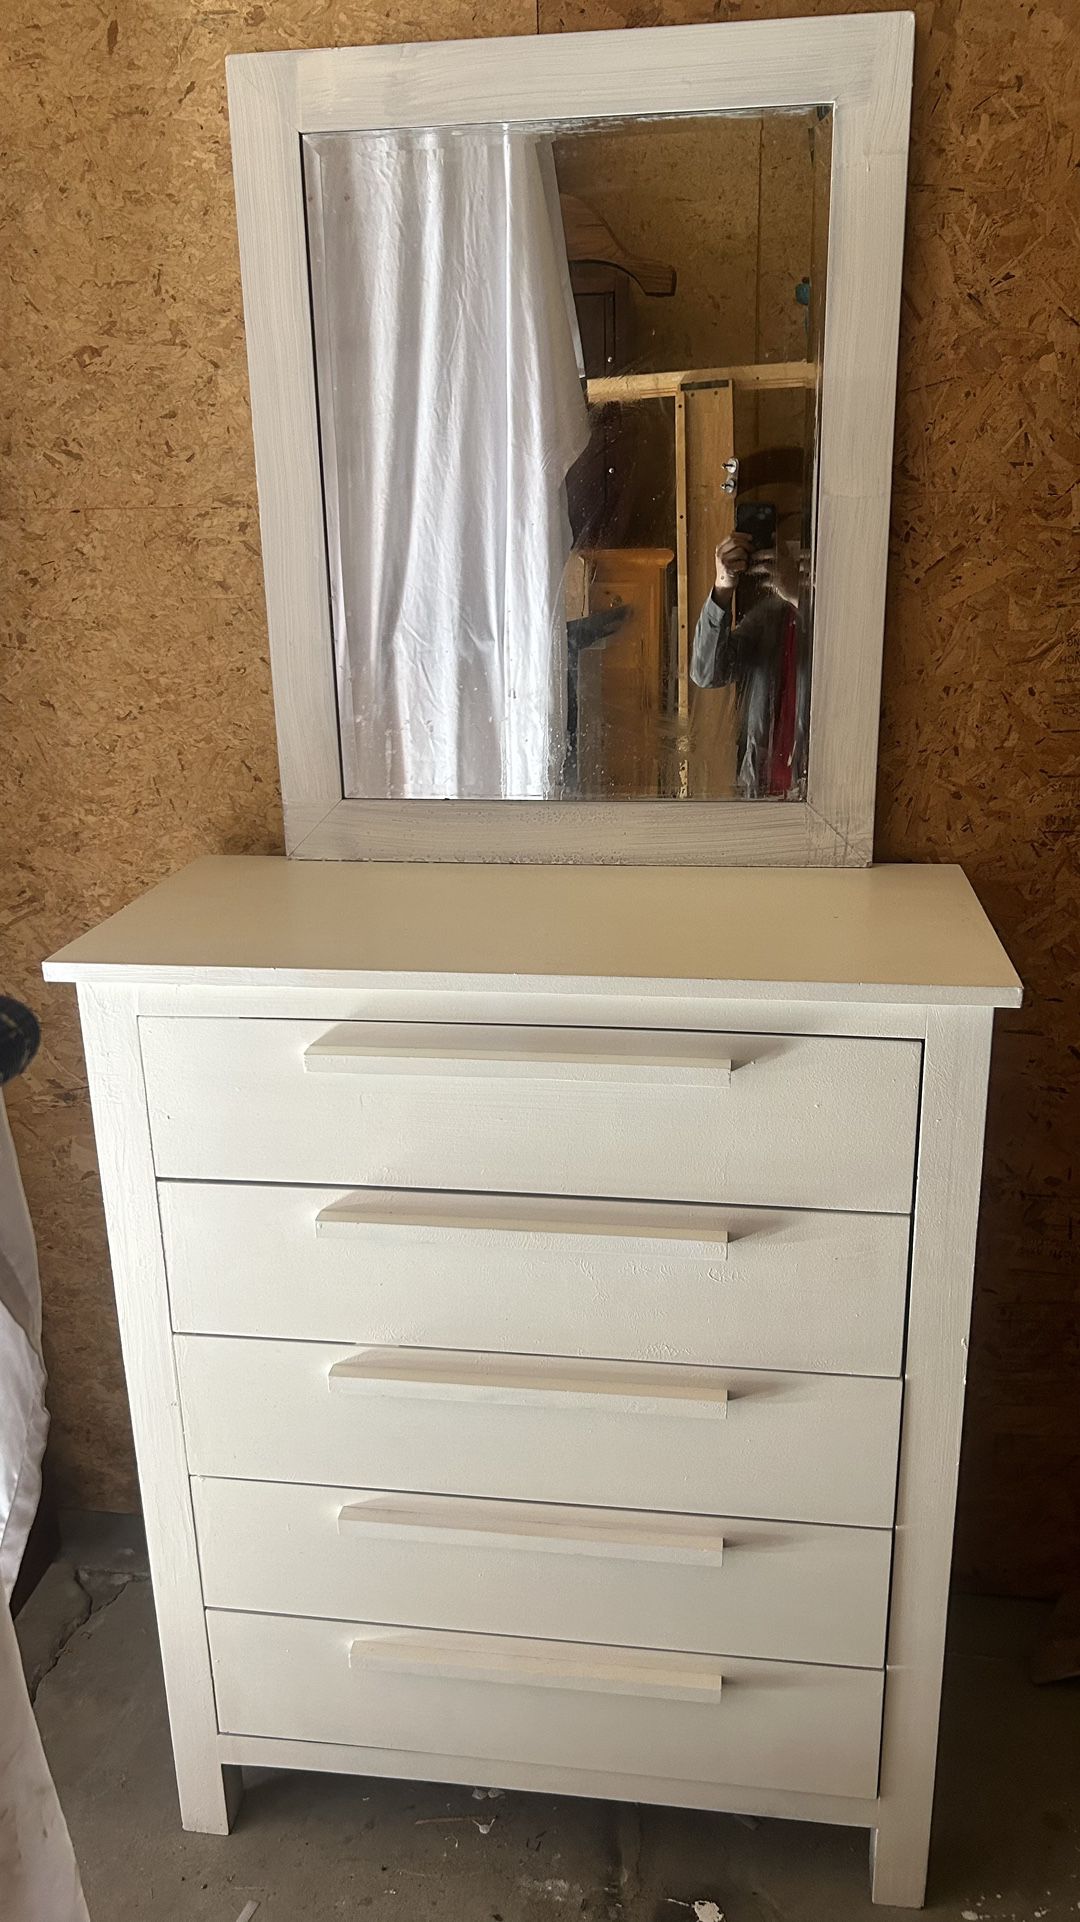 5 drawers white dresser tall chest with mirror L36”*D17”*H44”(address in description)